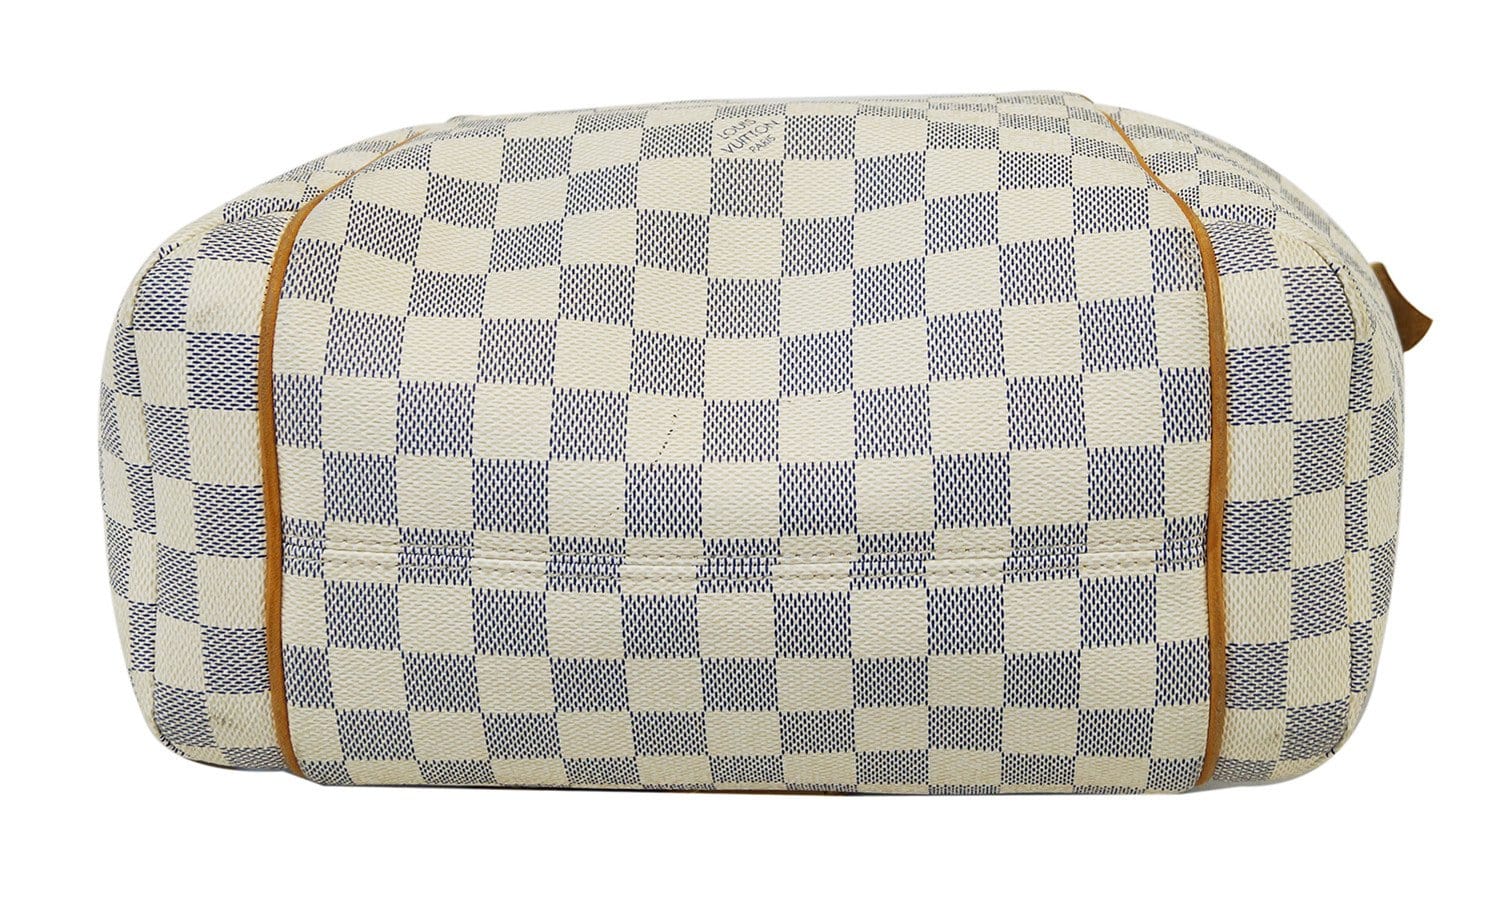 Luxury Cheaper - Auth Louis Vuitton Calvi Damier Azur Shoulder Bag ✓  Overall Condition: Mint/Like New ✓ Style: Shoulder Bag ✓ Outside: No rips,  No tears, Minor scratches ✓ Inside: No rips